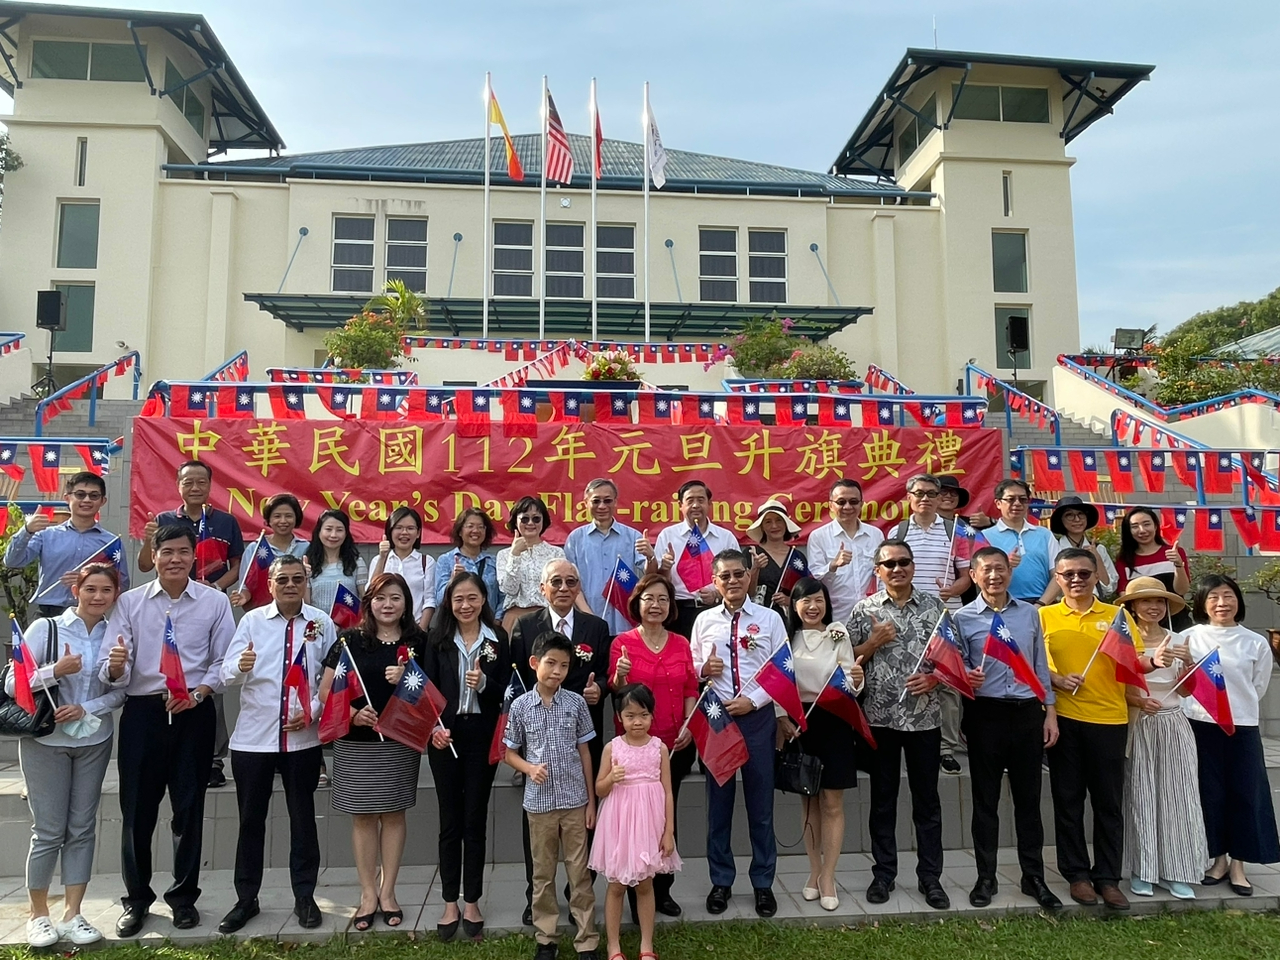 Representative Anne Hung and colleagues from the Taipei Economic and Cultural Office in Malaysia wish everyone a Happy New Year at the 2023 Chinese Taipei School Kuala Lumpur New Year Flag Raising Ceremony 